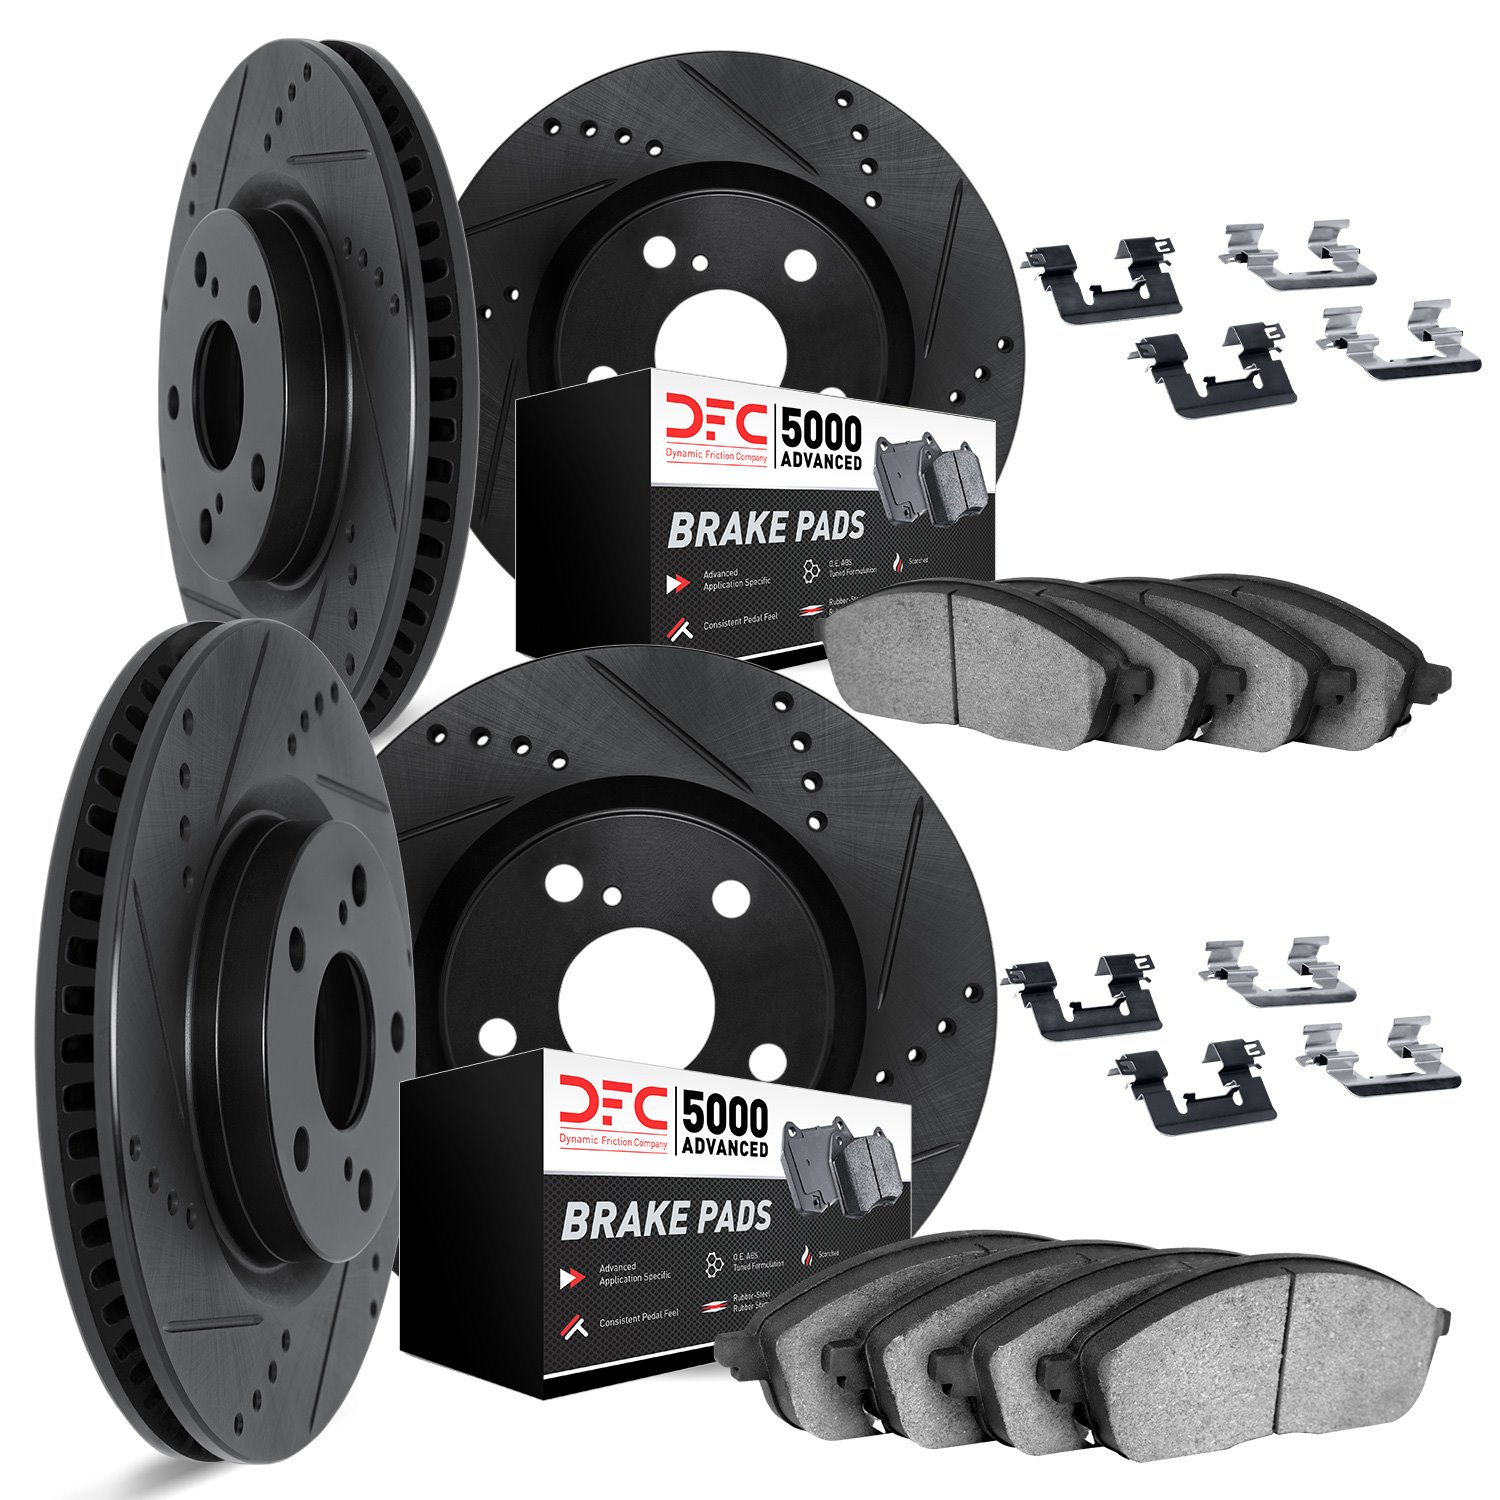 8514-31019 Drilled/Slotted Brake Rotors w/5000 Advanced Brake Pads Kit & Hardware [Black], 2008-2013 BMW, Position: Front and Re